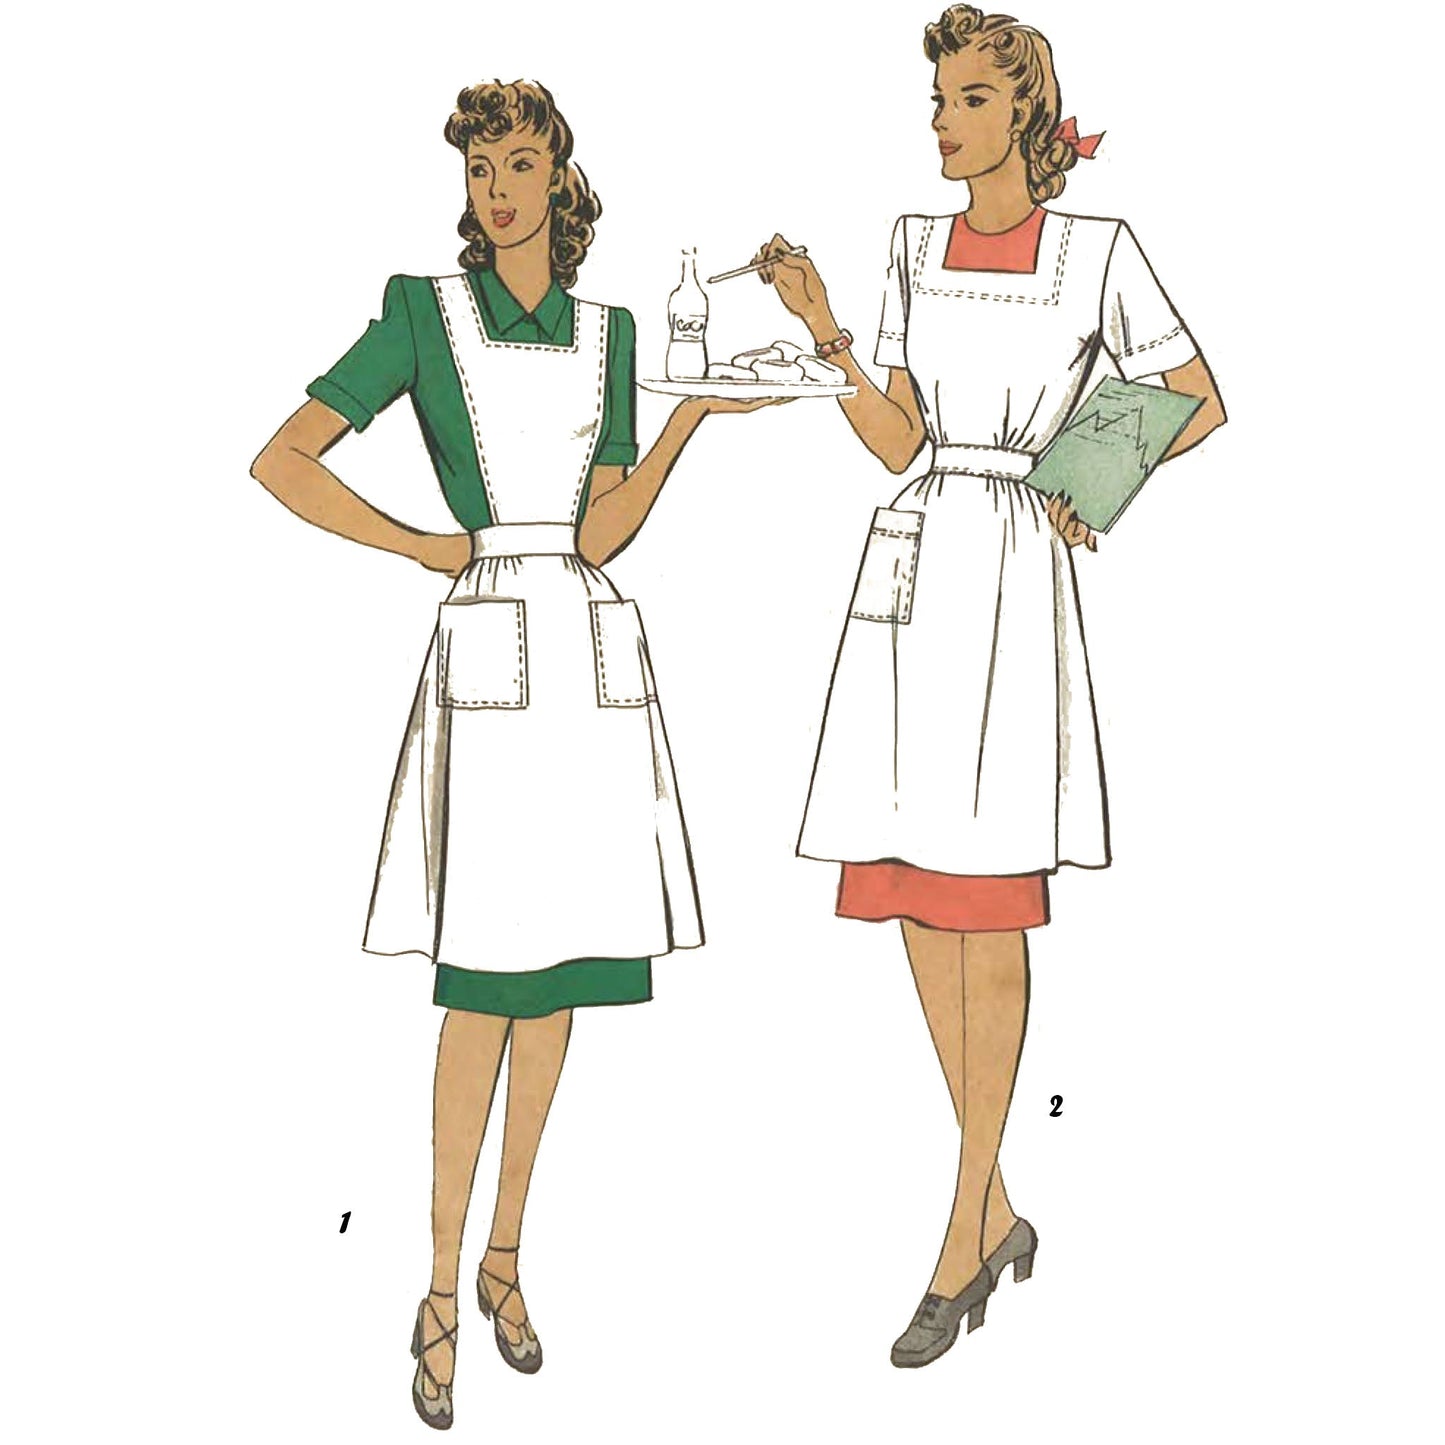 Women in American Red Cross uniform and Waitress Apron